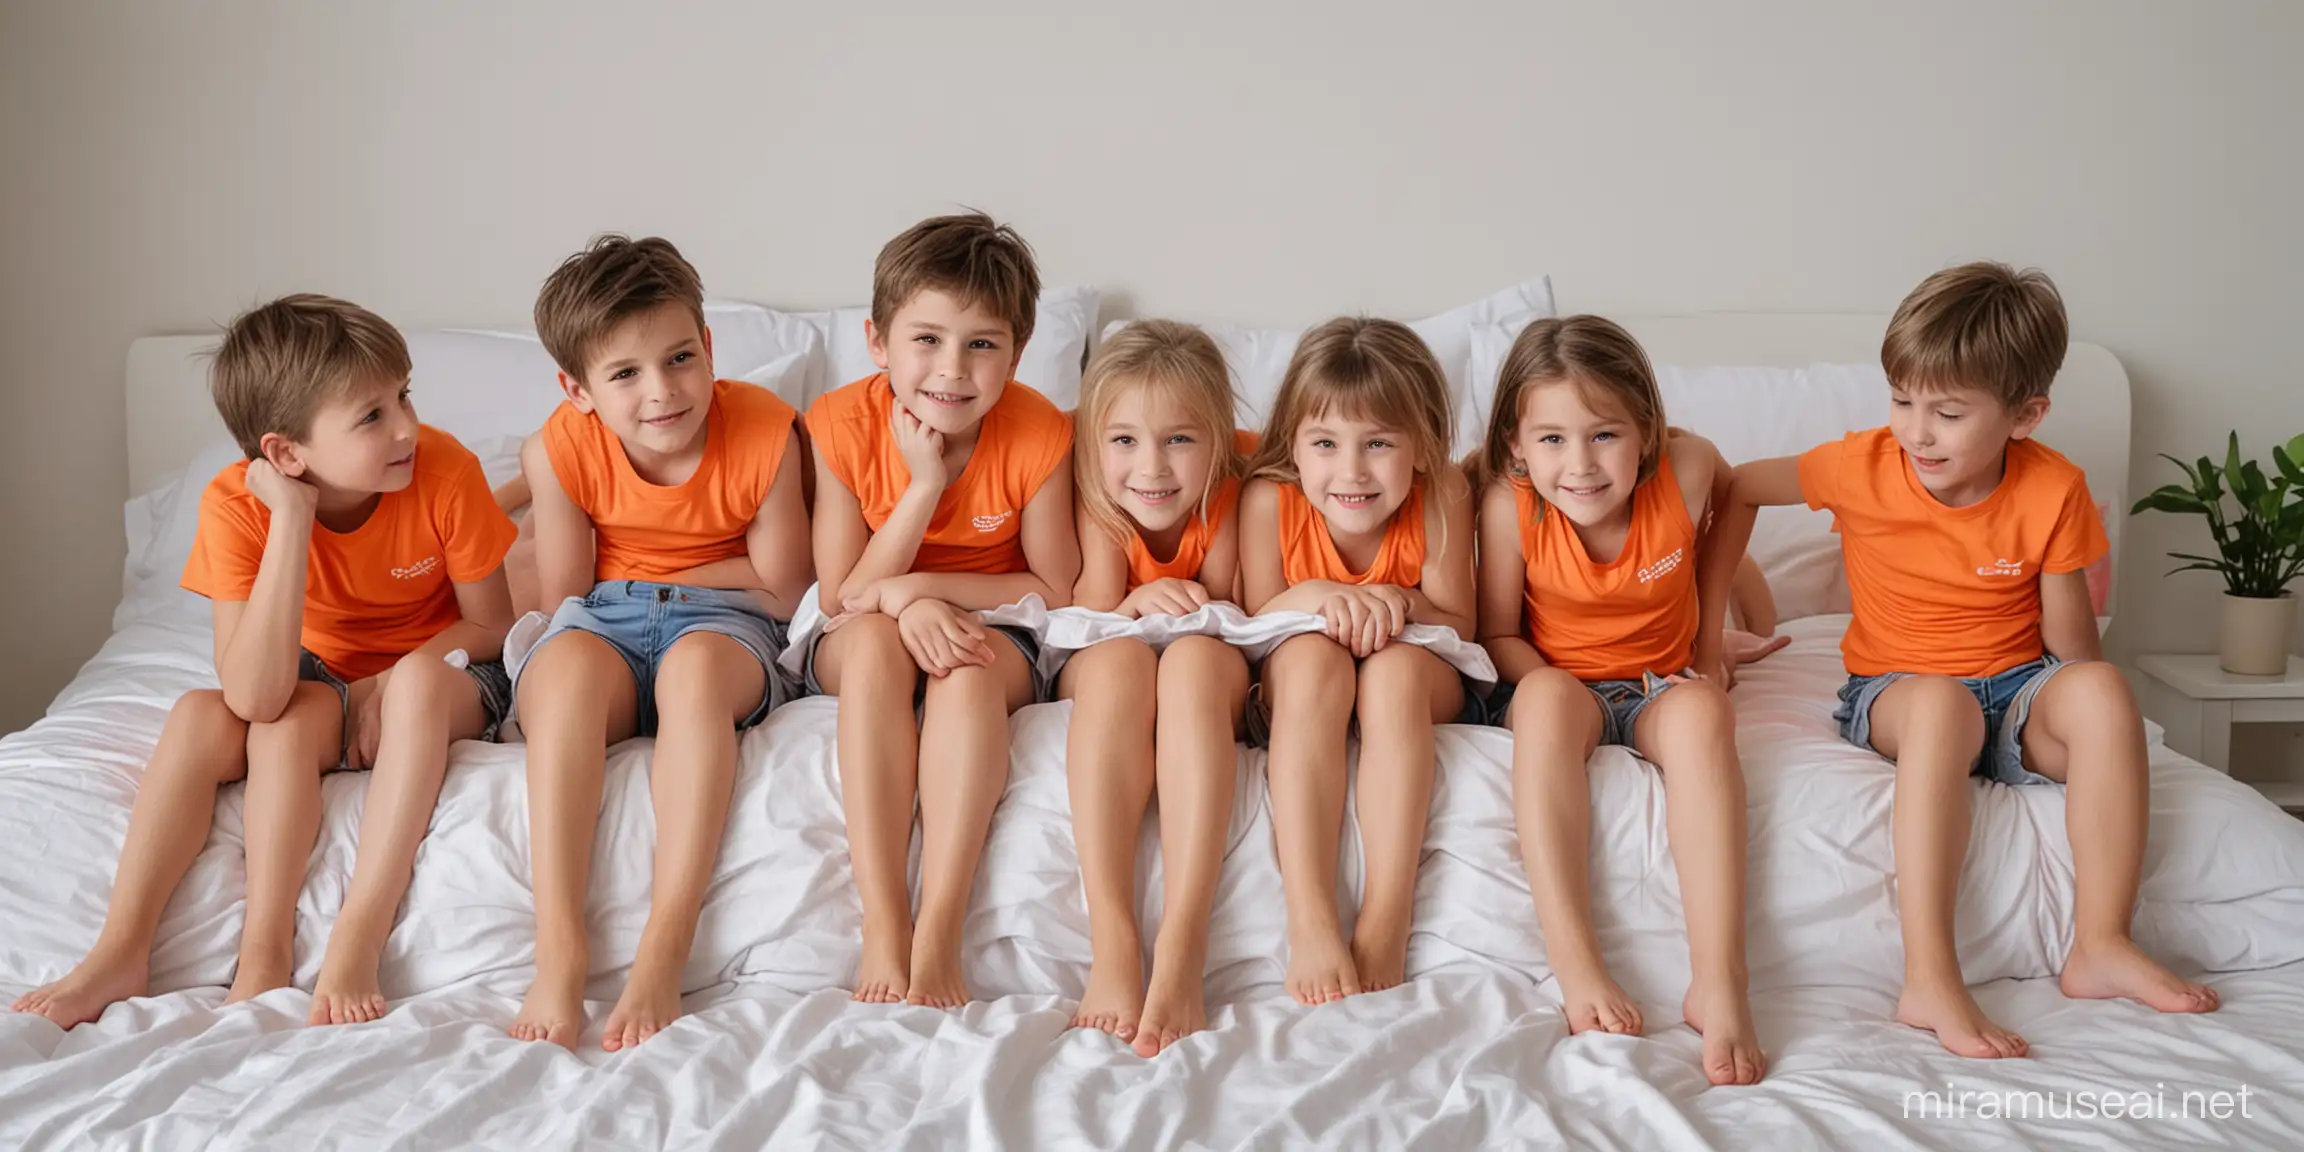 Cheerful Children Relaxing in Orange Sleeveless Shirts on White Bed